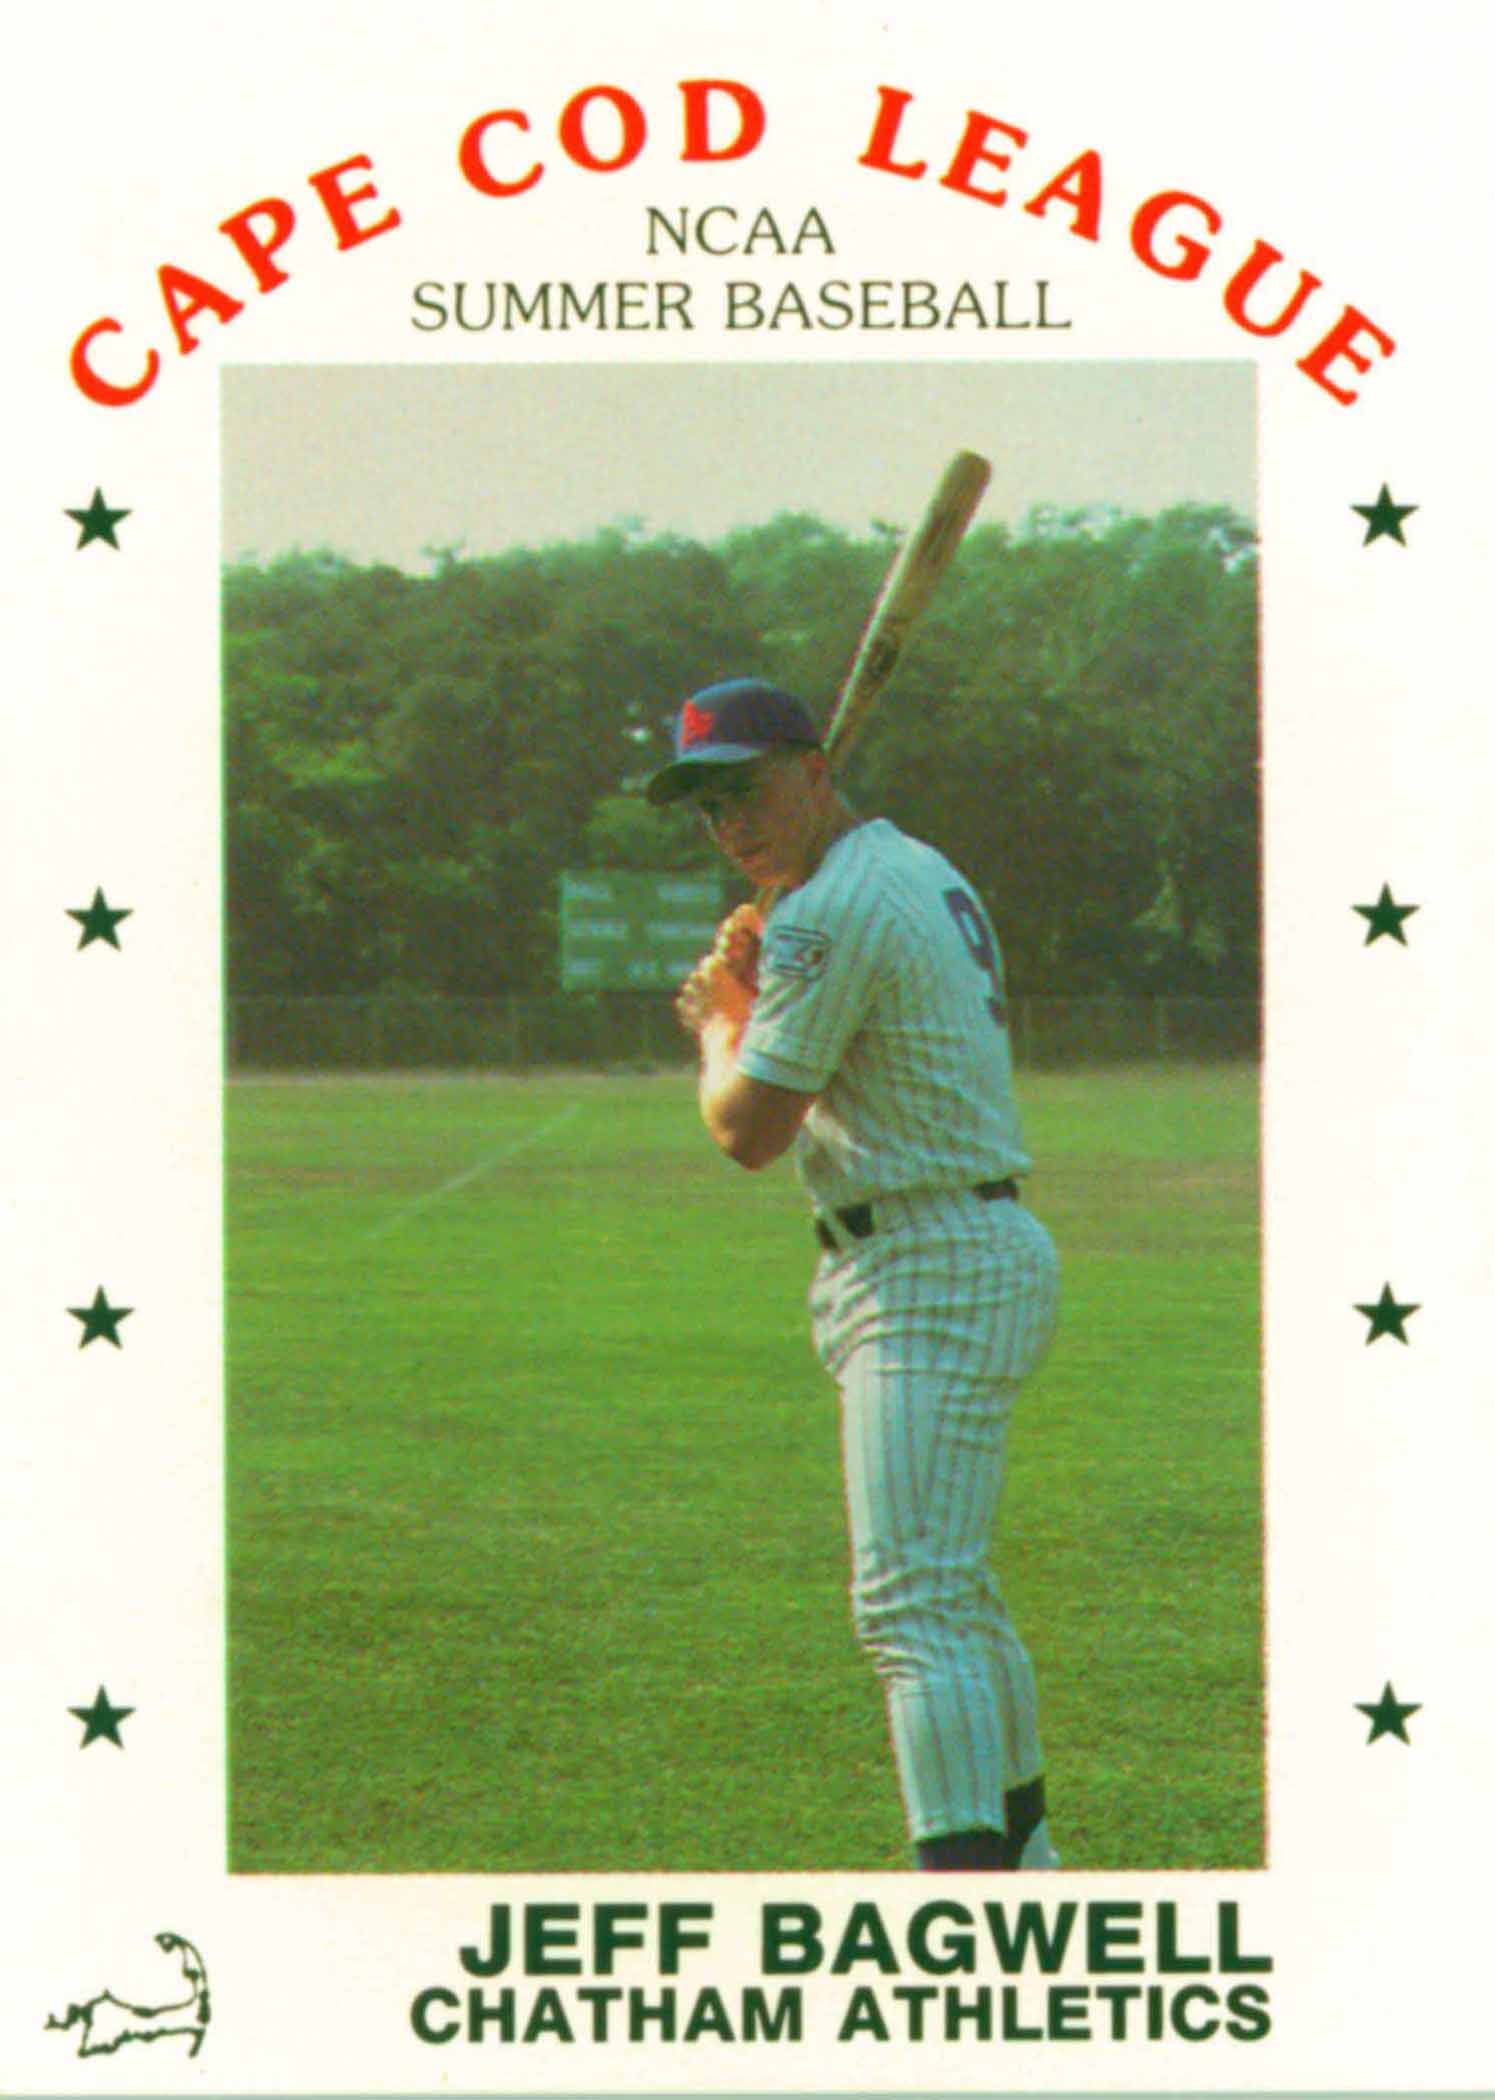 1988 Cape Cod Prospects P and L Promotions